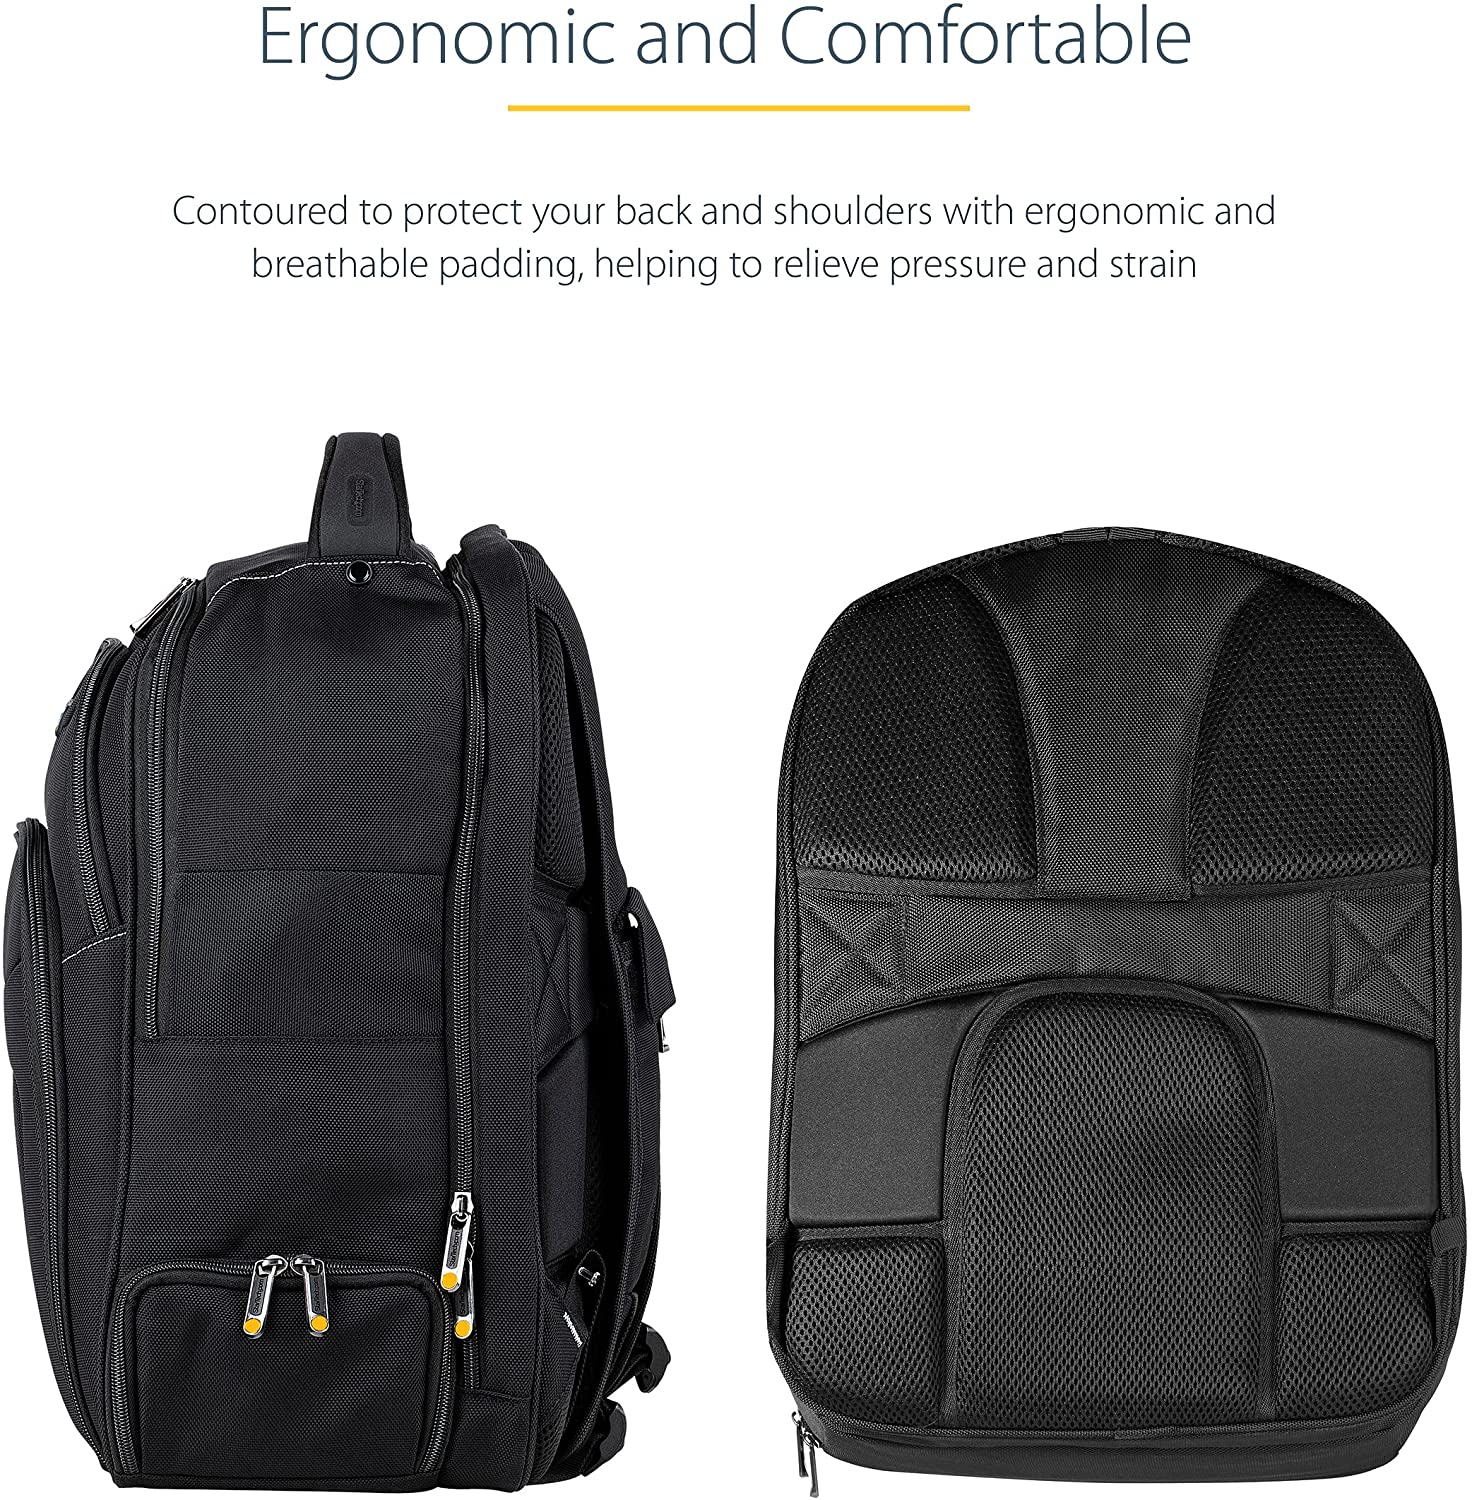 The Best Laptop Backpacks for Professionals - Carryology